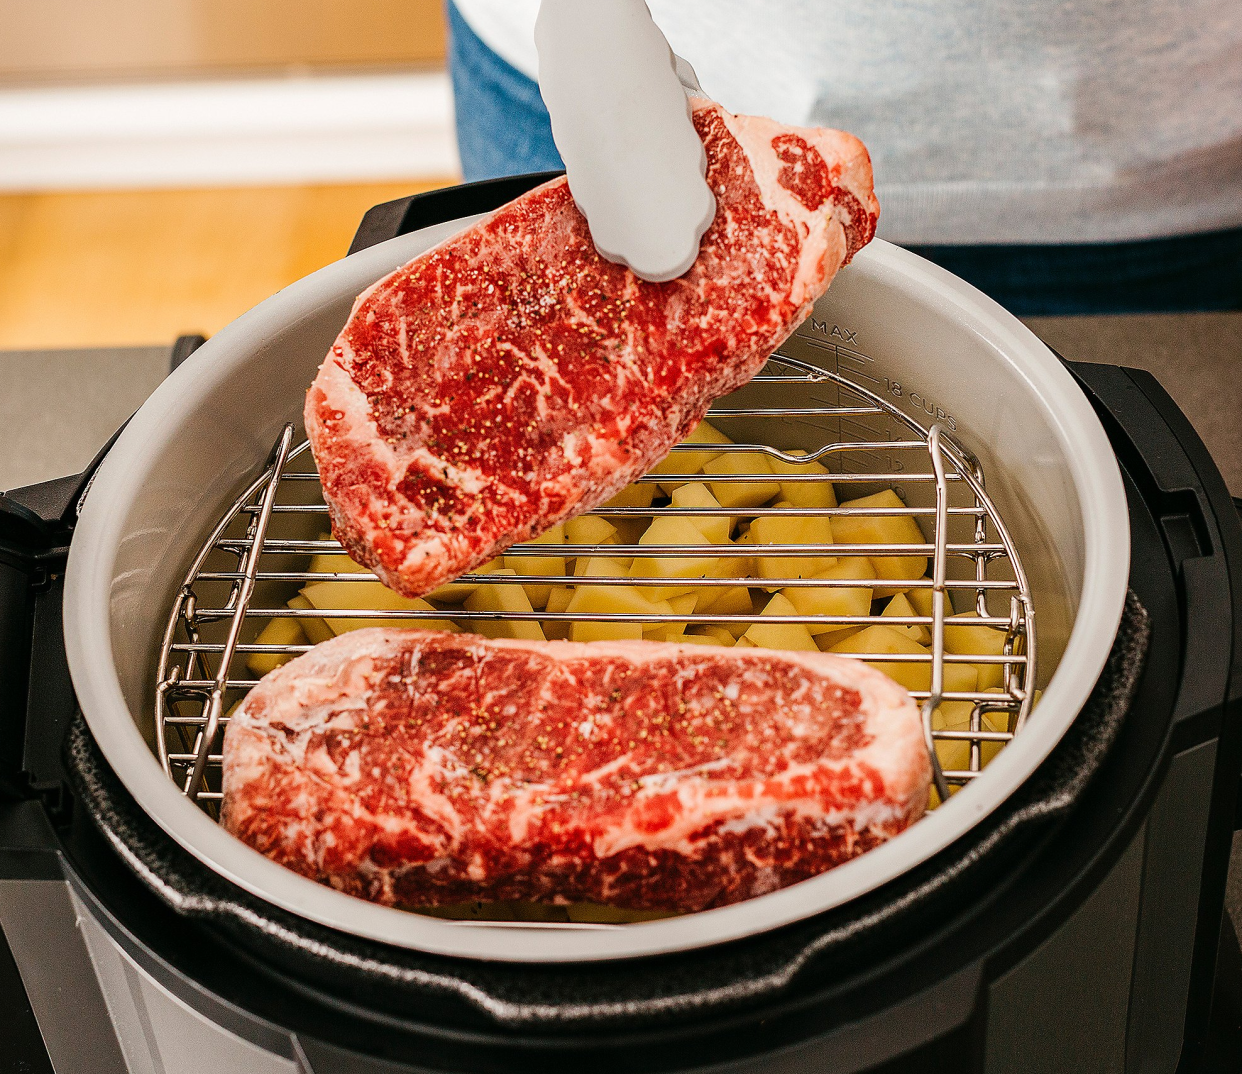 Person placing raw steak on grill of multi-cooker above cubed potatoes.